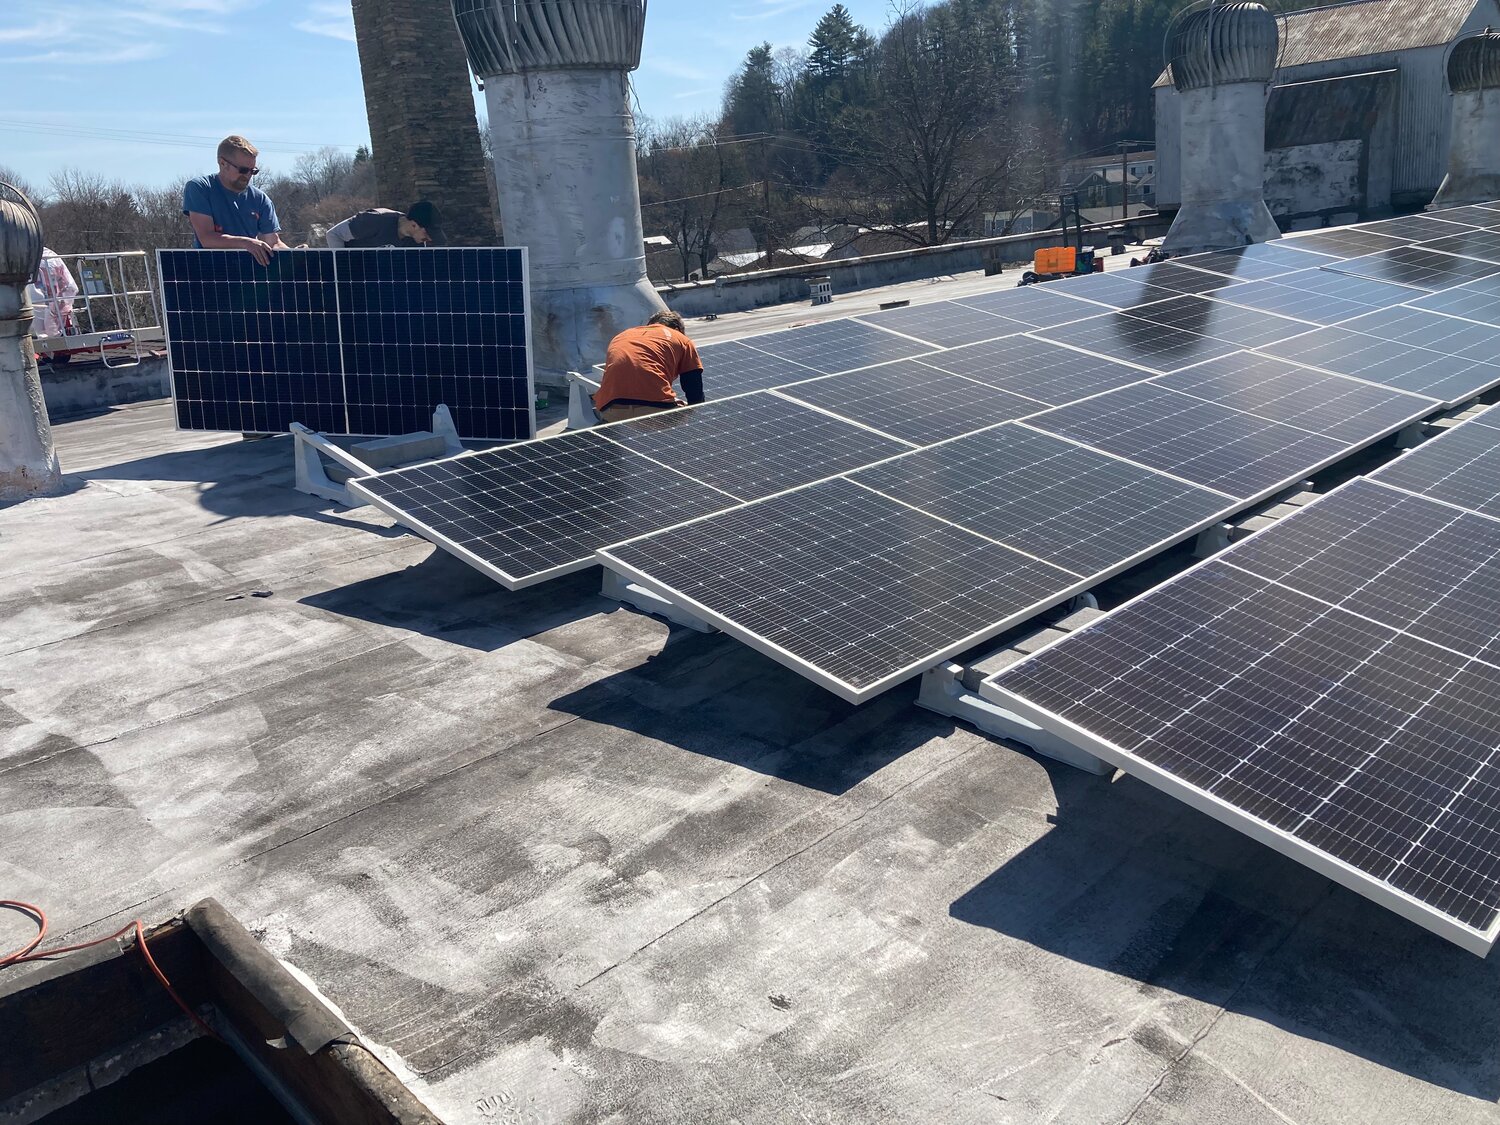 The last of 82 solar panels is mounted on the roof of the Ritz Company Playhouse in Hawley.